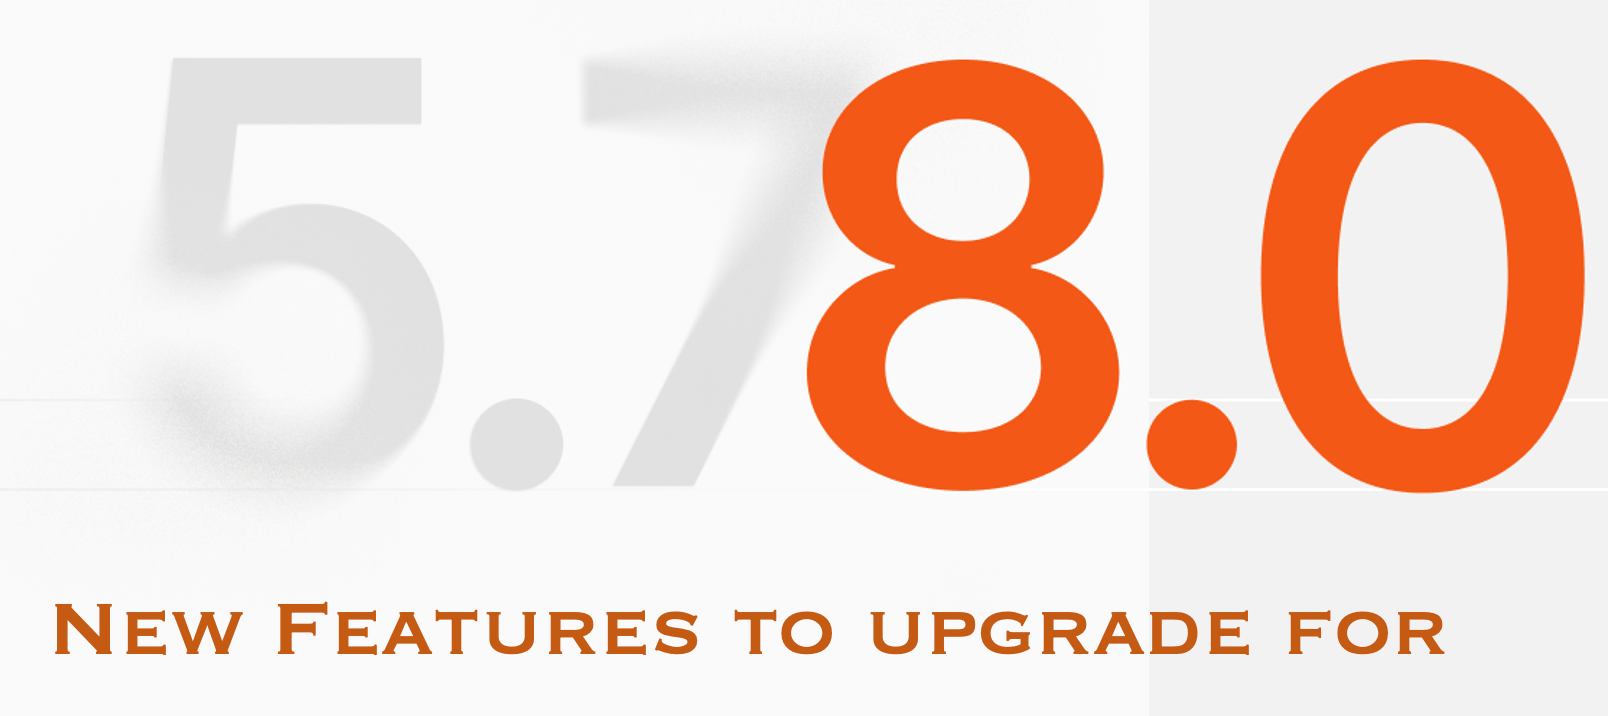 57 to 80 upgrade features